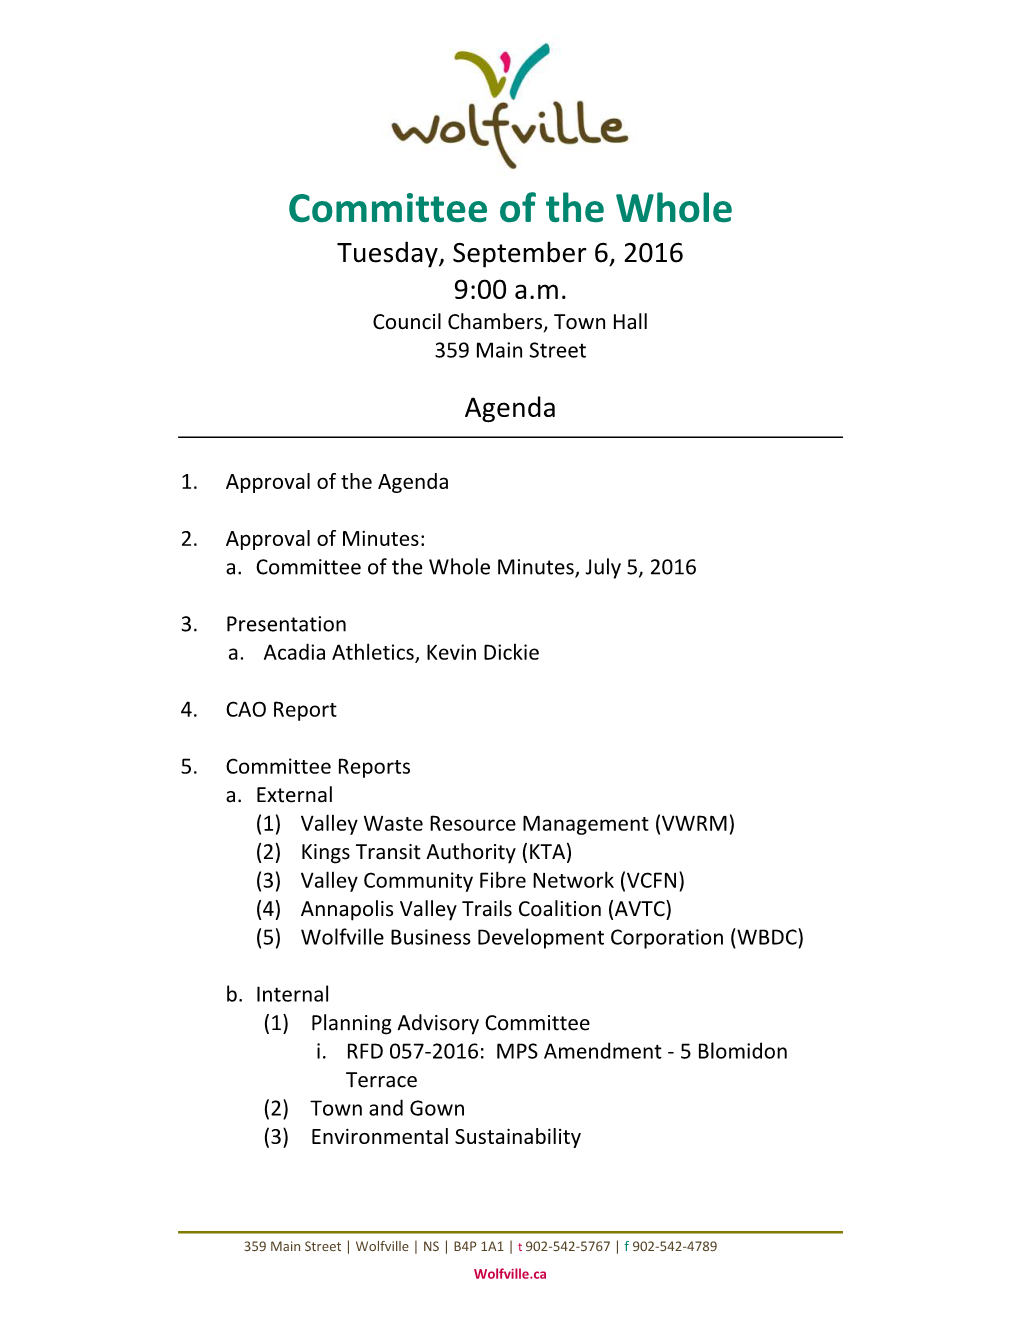 Committee of the Whole Tuesday, September 6, 2016 9:00 A.M